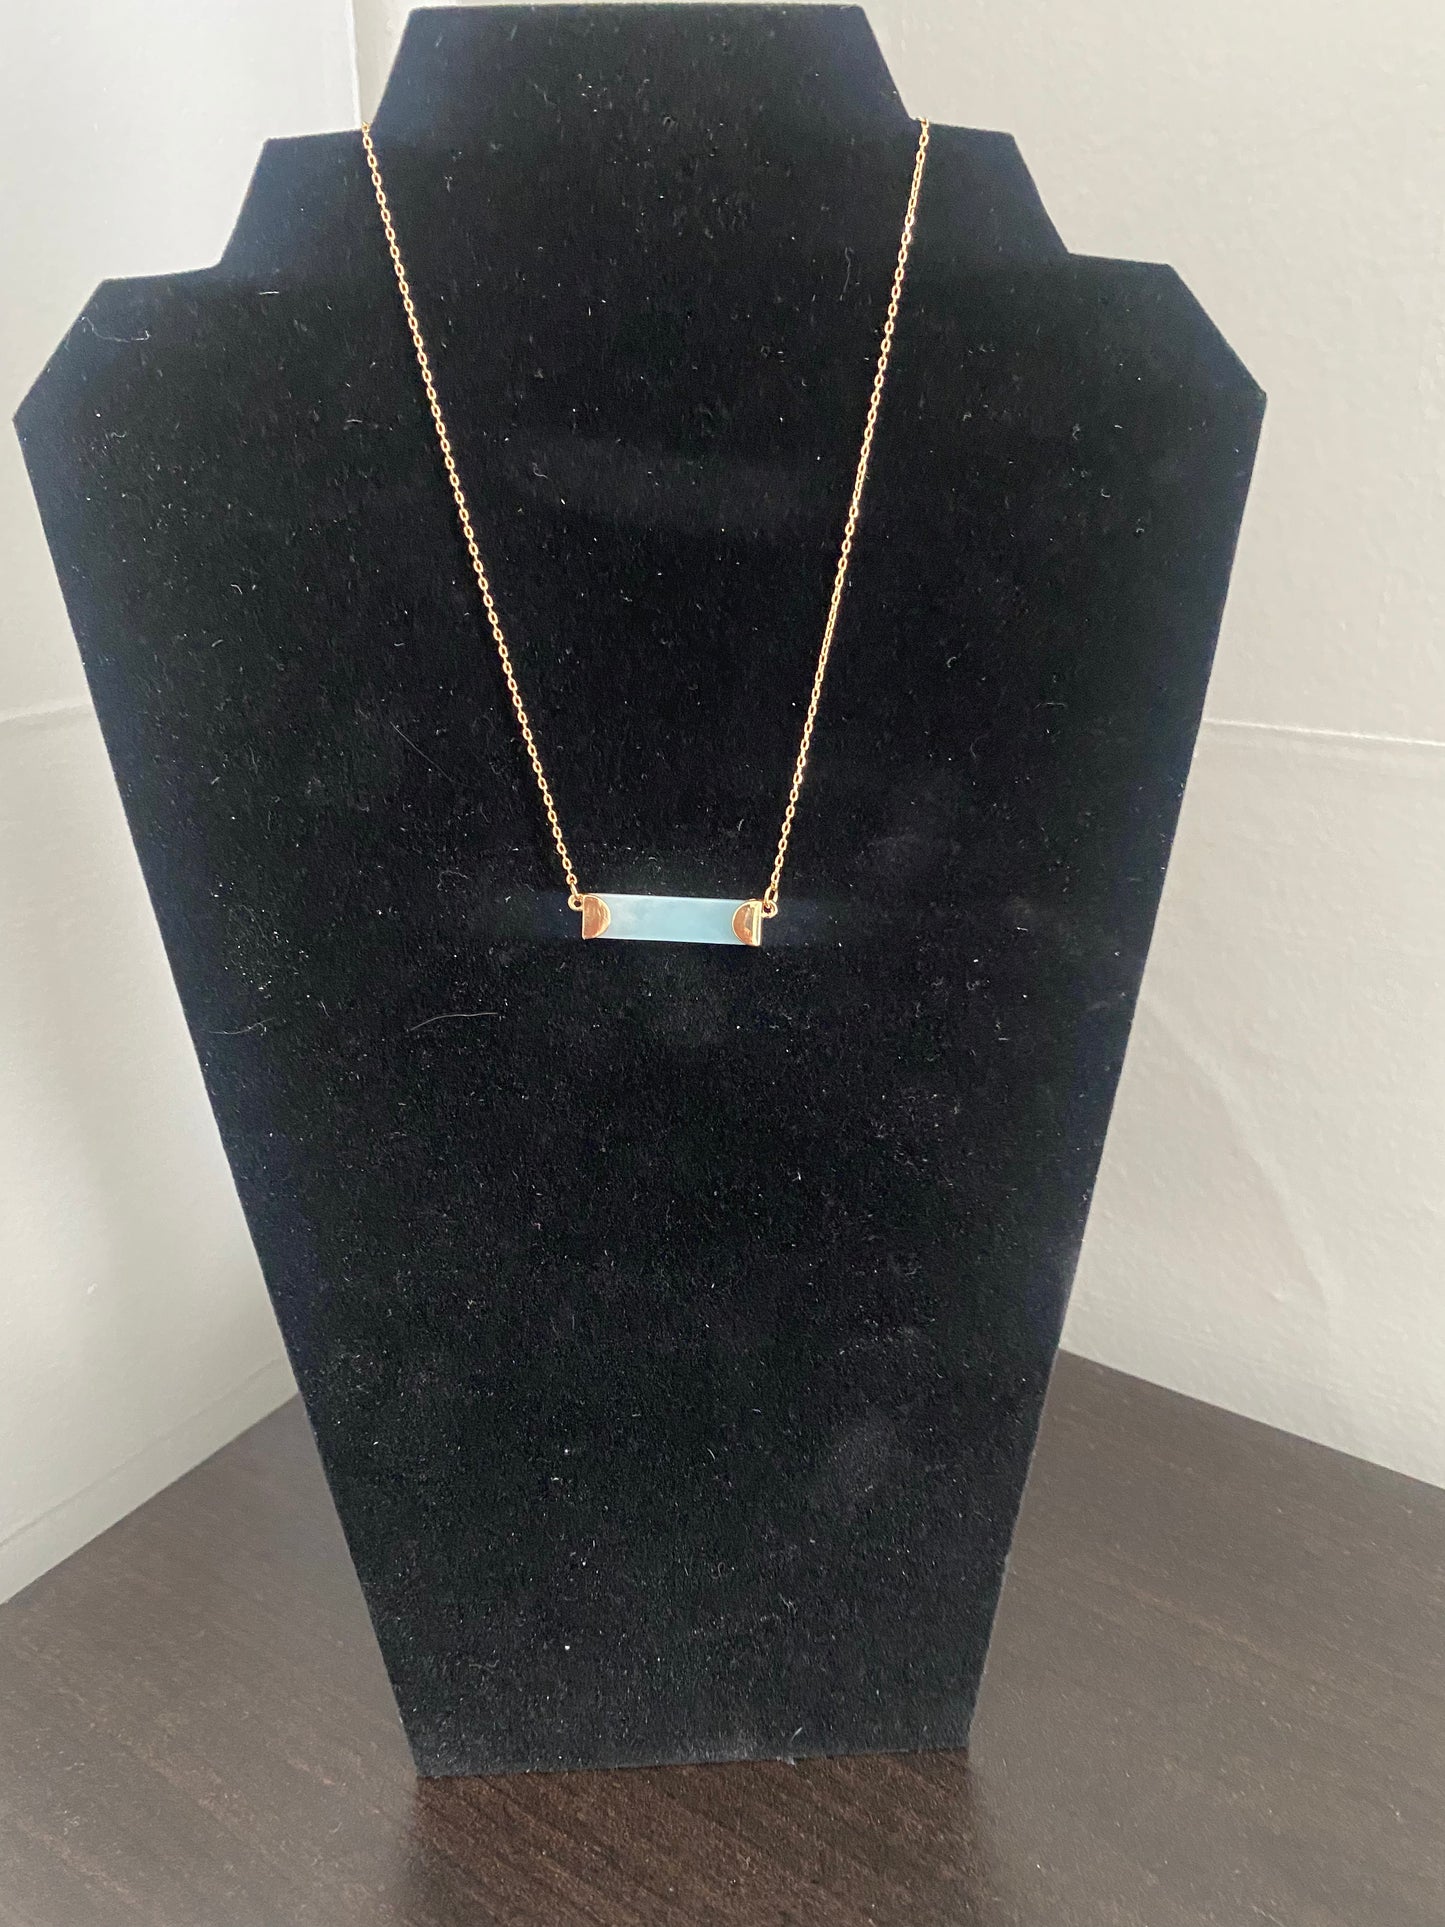 stone bar necklace with gold hardware